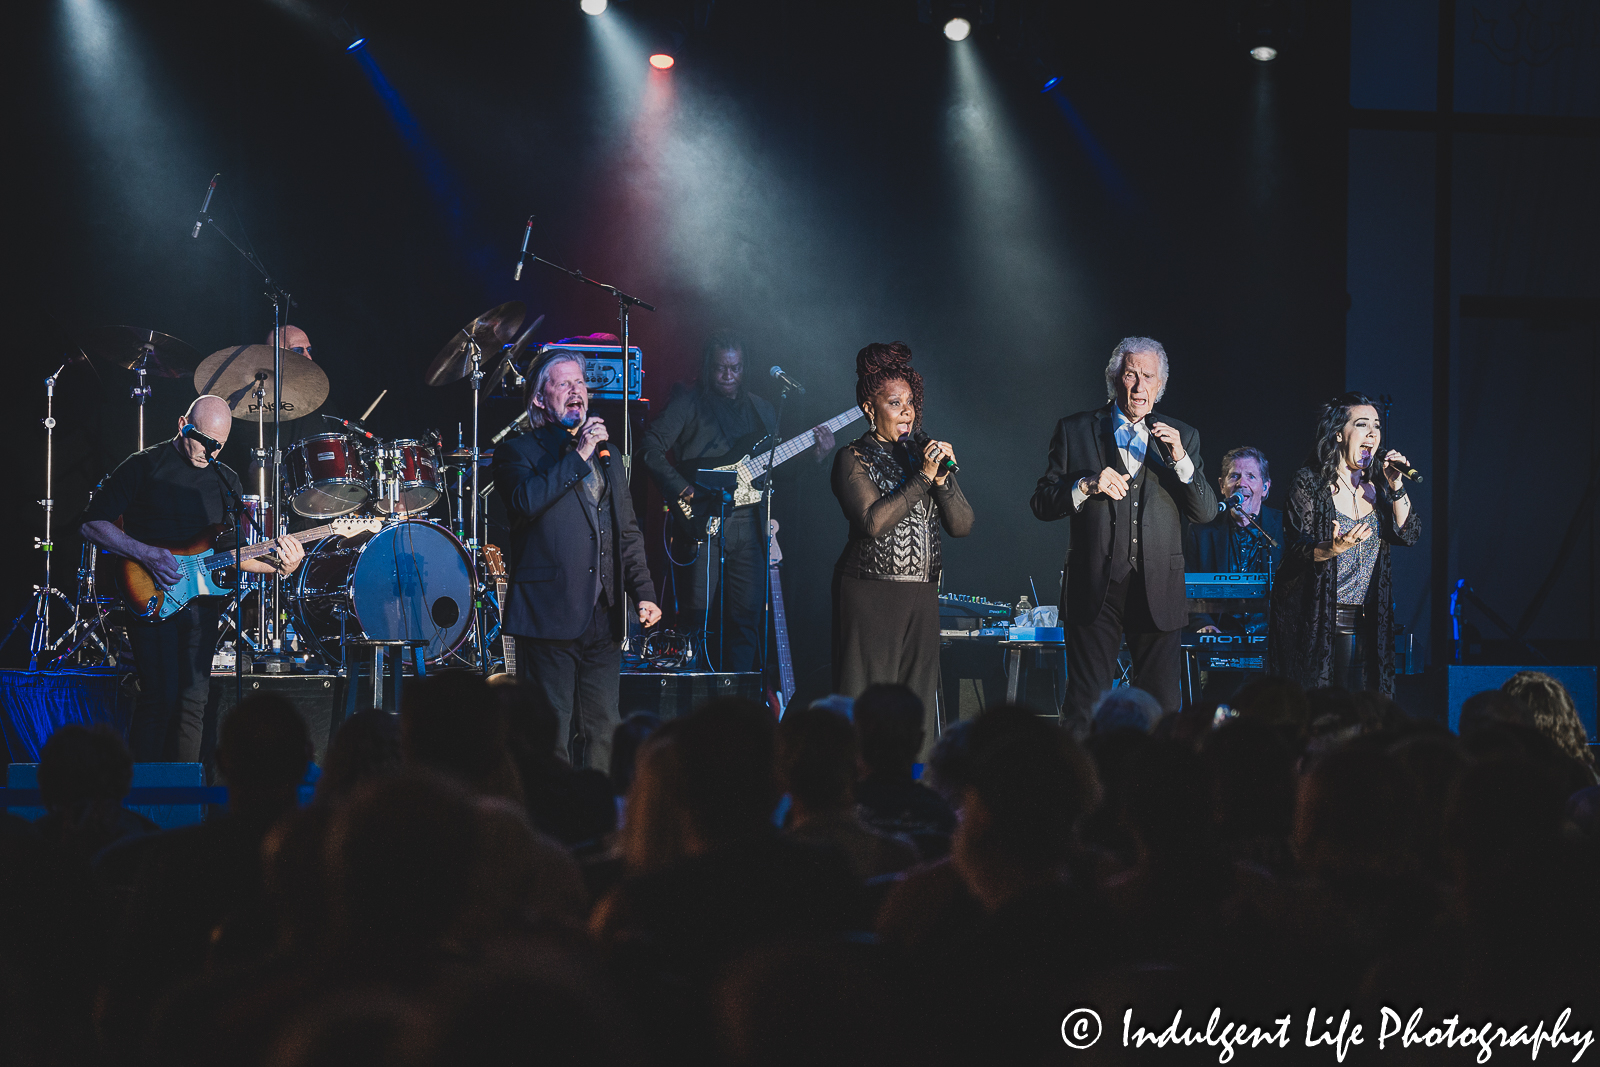 Bill Medley and Bucky Heard live in concert with fellow band members of The Righteous Brothers at Prairie Band Casino in Mayetta, KS on June 29, 2023.